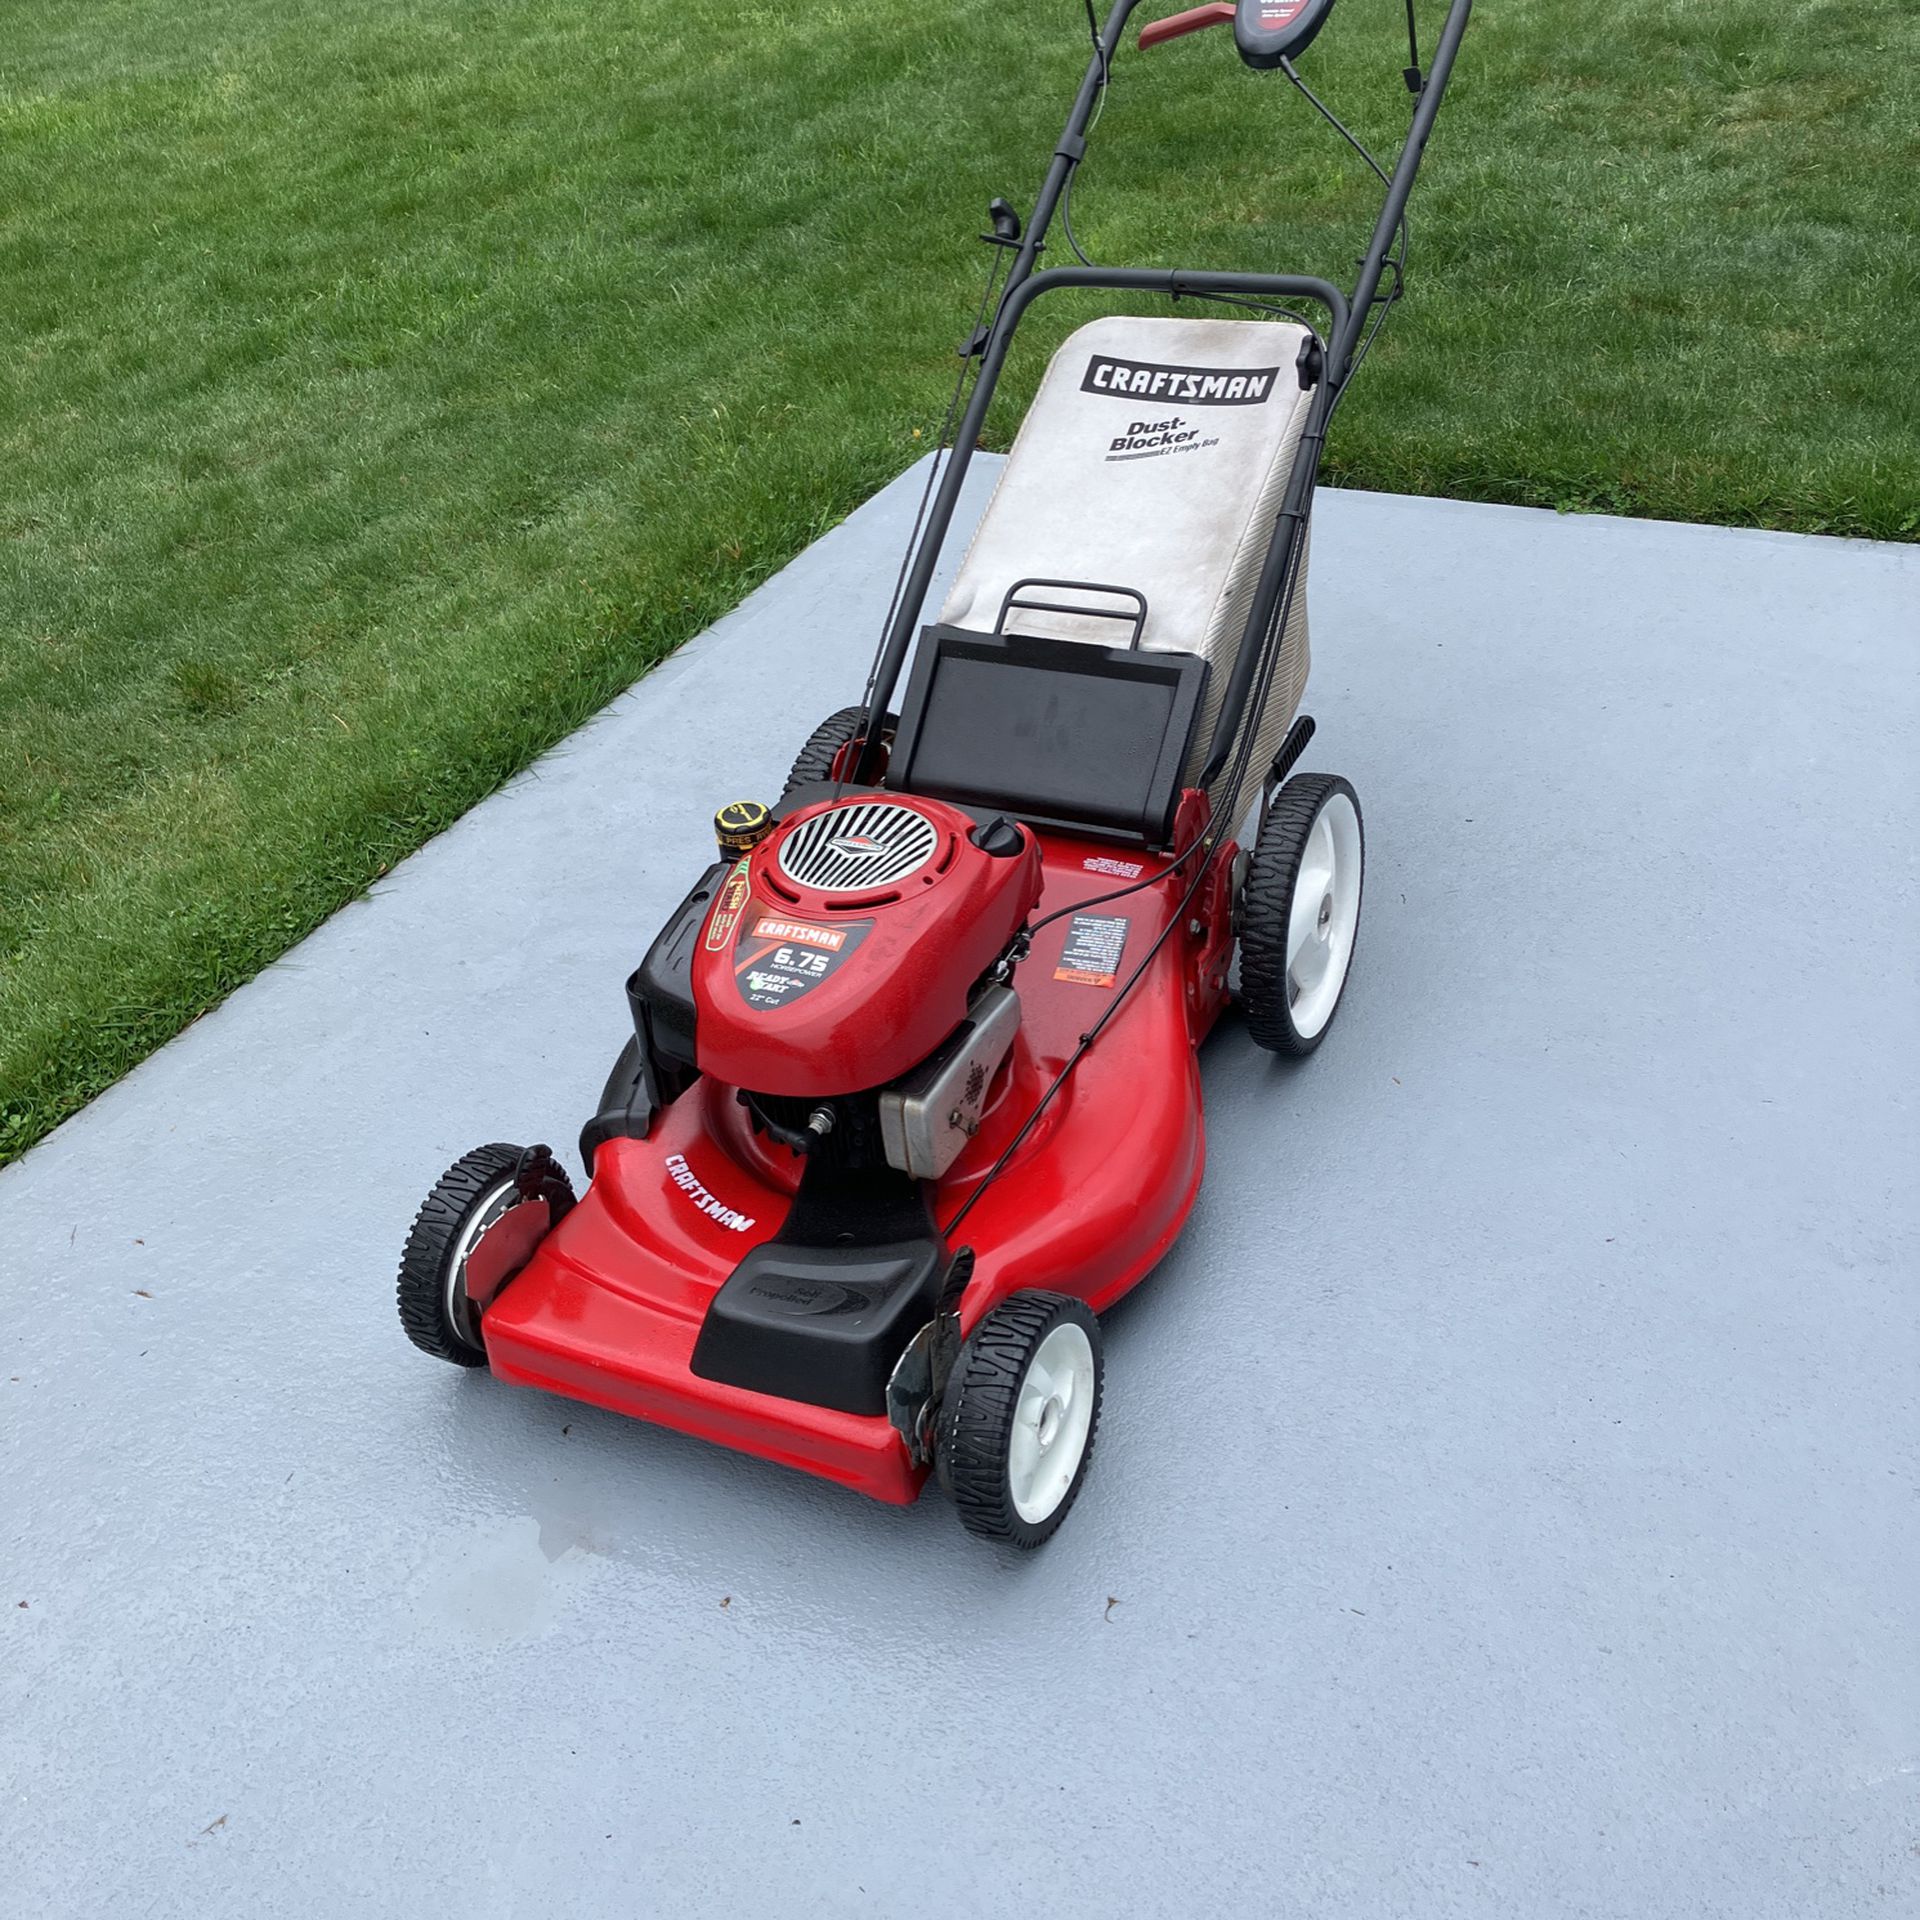 CRAFTSMAN Self-propelled LAWN MOWER with 6.75-hp BRIGGS & STRATTON Engine & 22” Deck, Plus Automatic Choke Runs Great 👍 